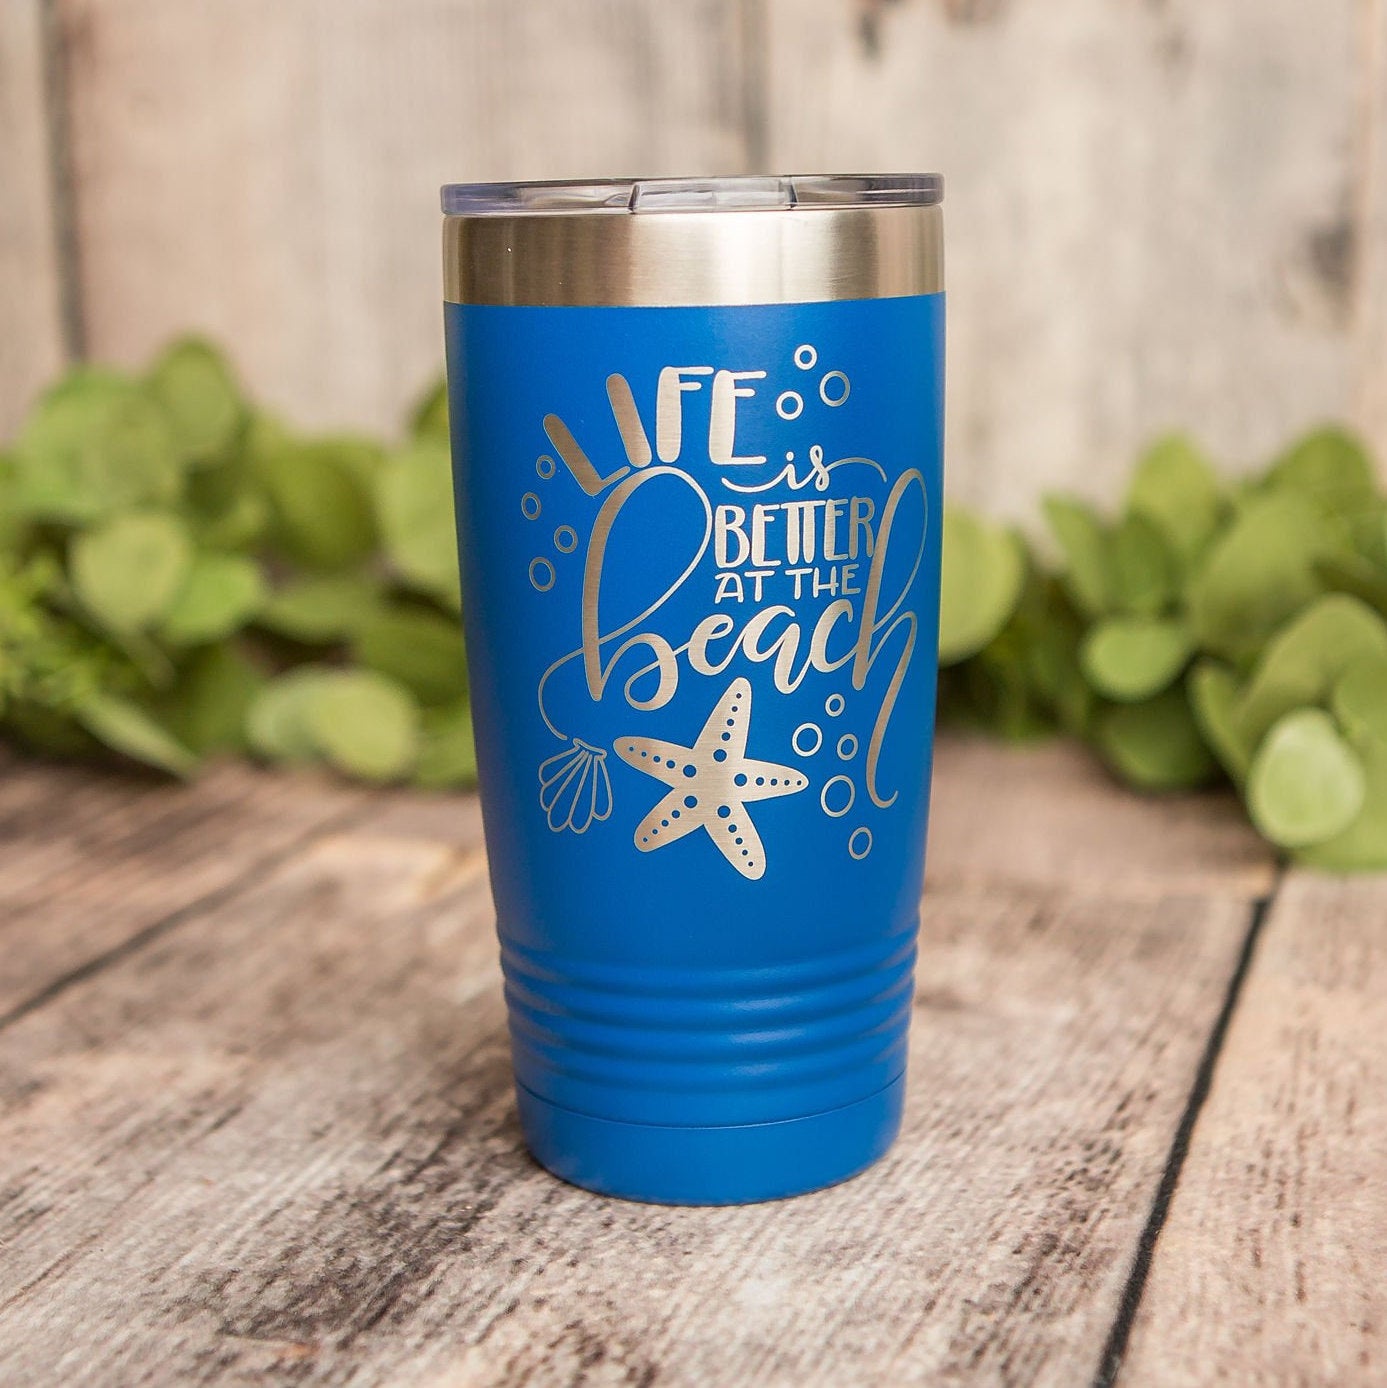 https://3cetching.com/wp-content/uploads/2020/09/life-is-better-at-the-beach-engraved-stainless-steel-tumbler-yeti-style-cup-vacation-tumbler-5f5fc45b.jpg